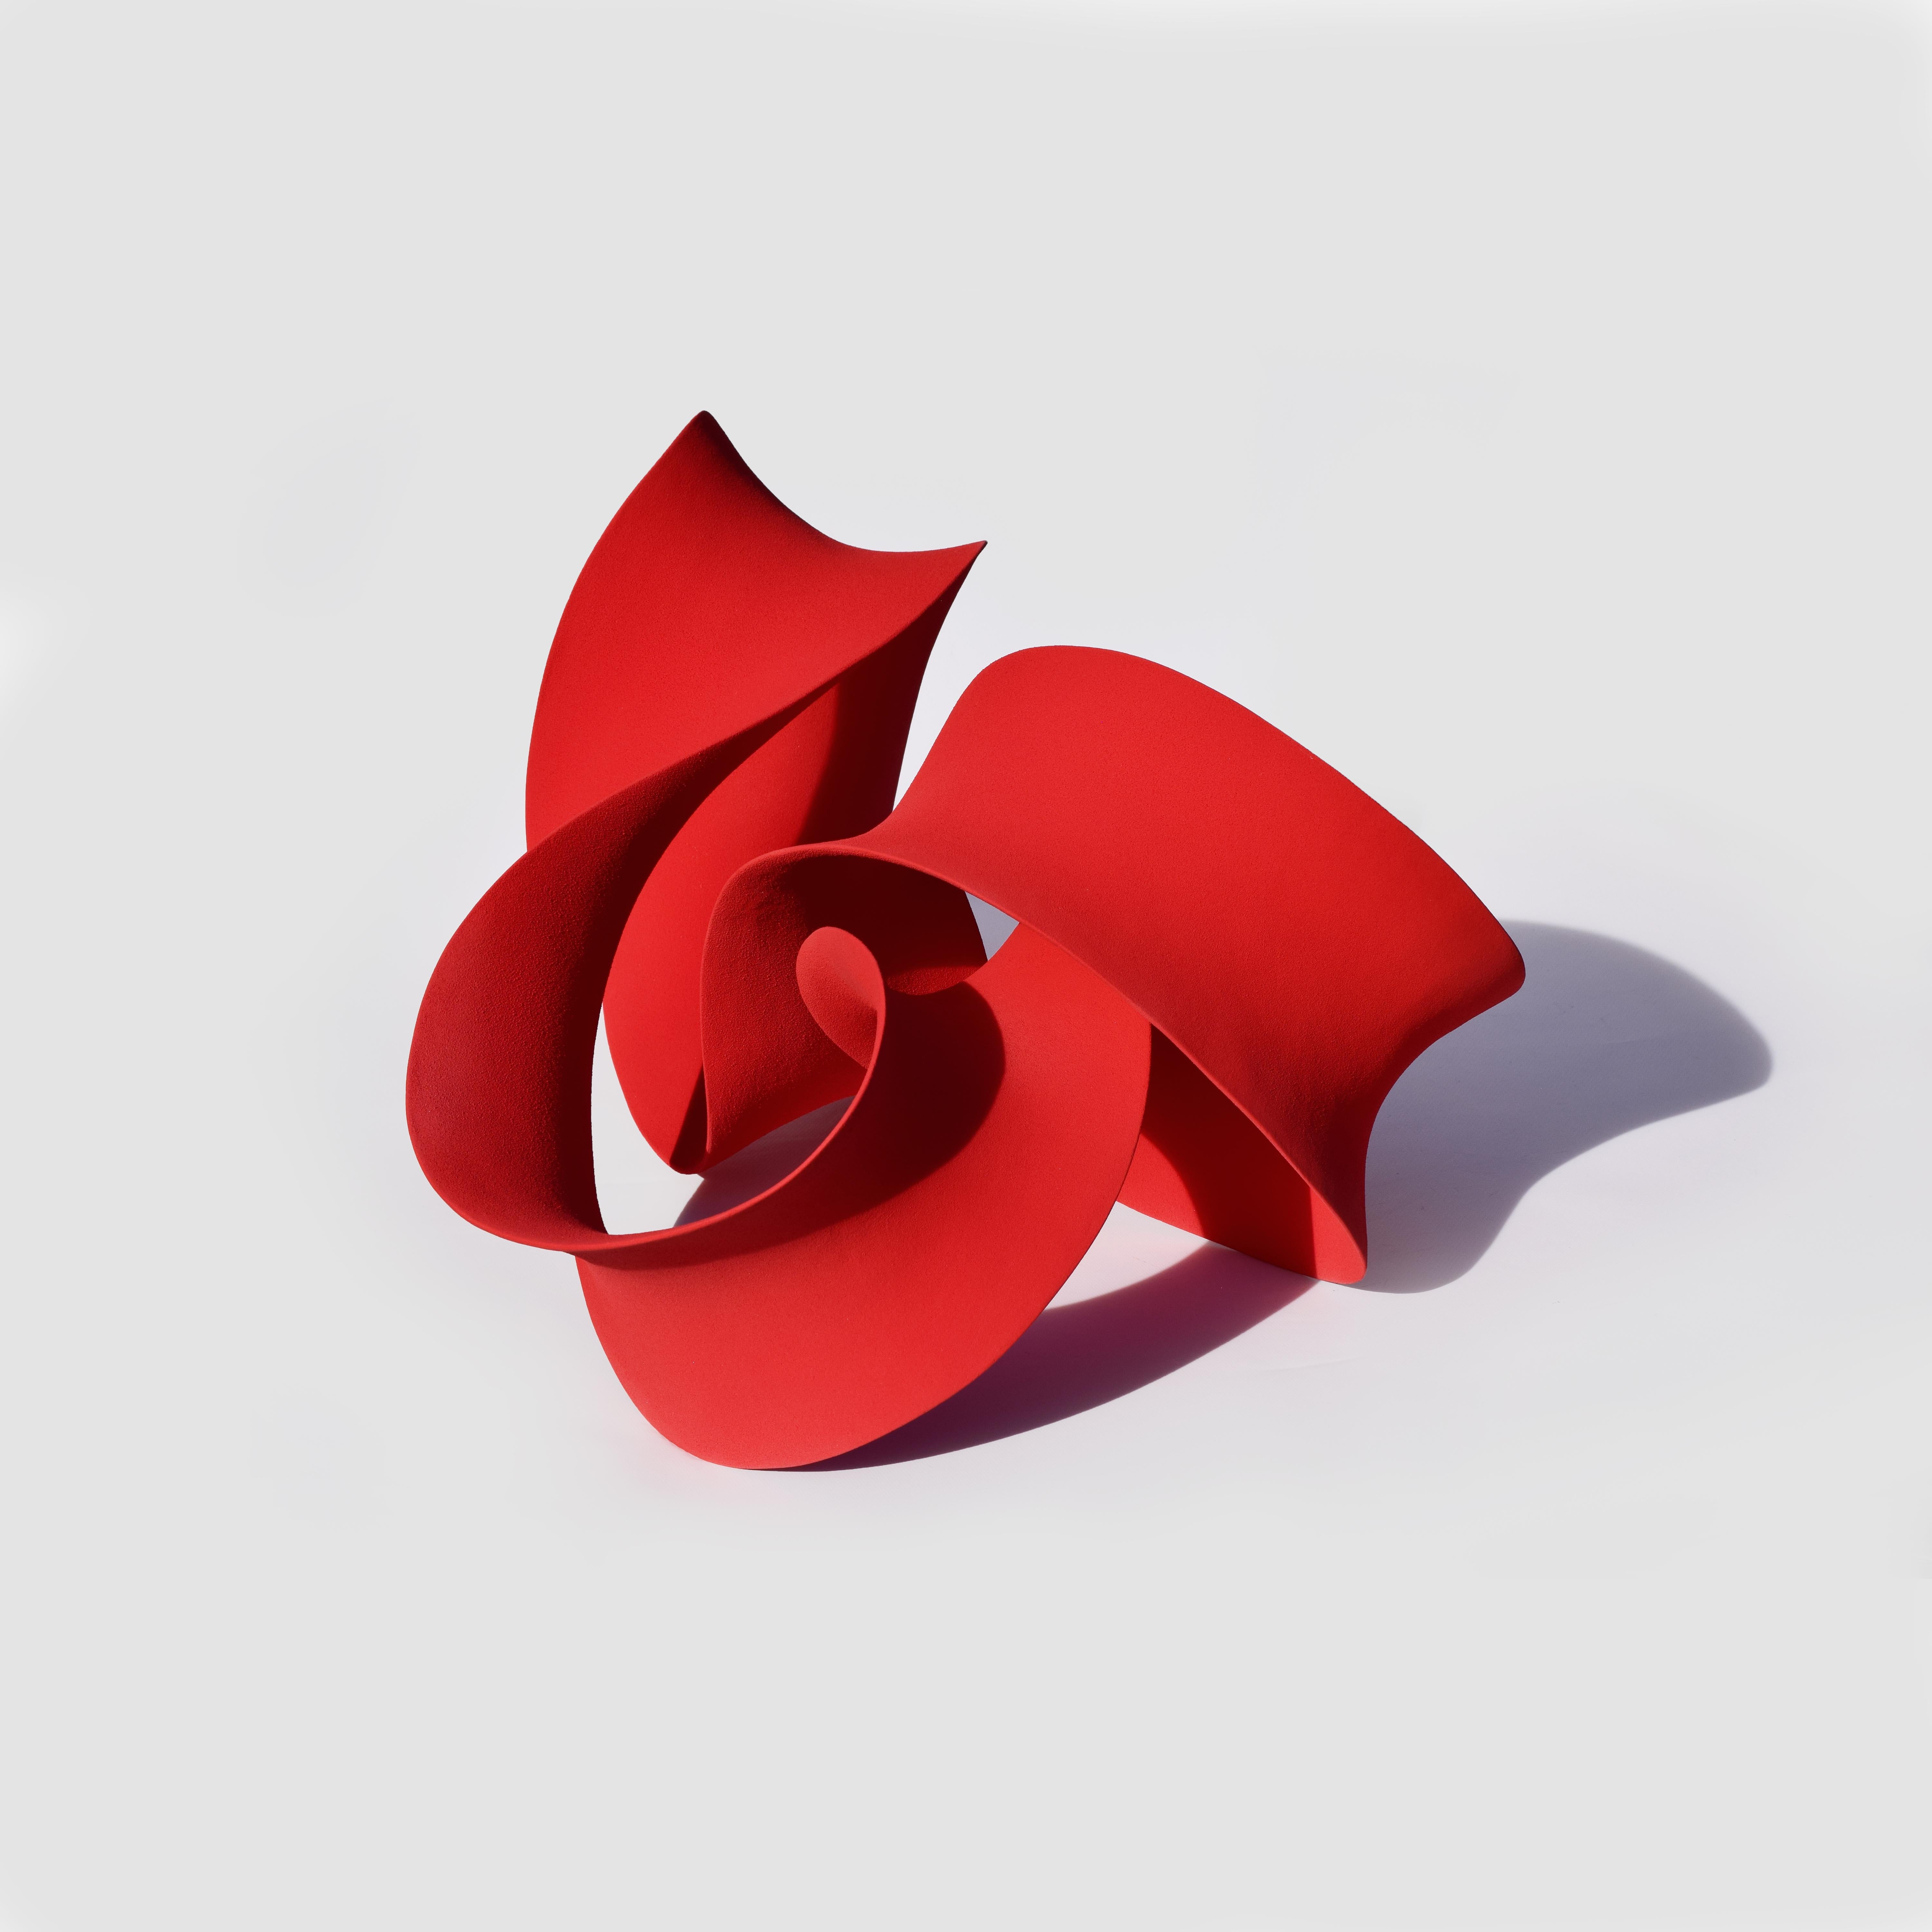 Swirling Red, 2023 (Ceramic, C. 13 in. h x 22 in. w x 17.7 in. d, Object No.: 4191)

Merete works with abstract sculptural form and is interested in the way one defines and comprehends space through physical form. Her ceramic creations represent an